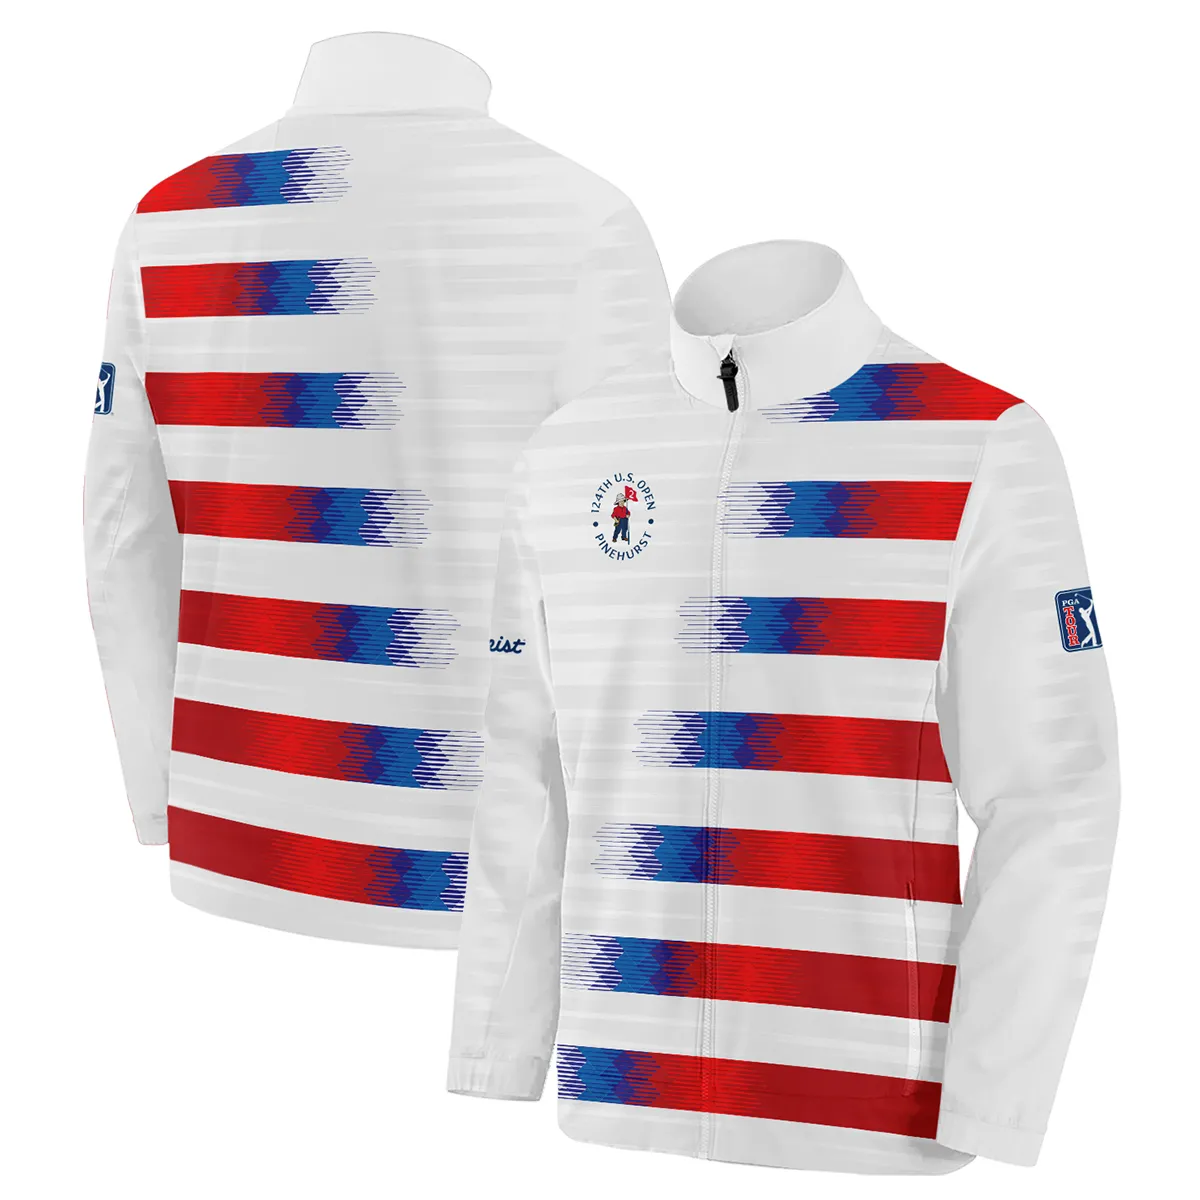 124th U.S. Open Pinehurst Titleist Stand Colar Jacket Sports Blue Red White Pattern All Over Print Stand Colar Jacket